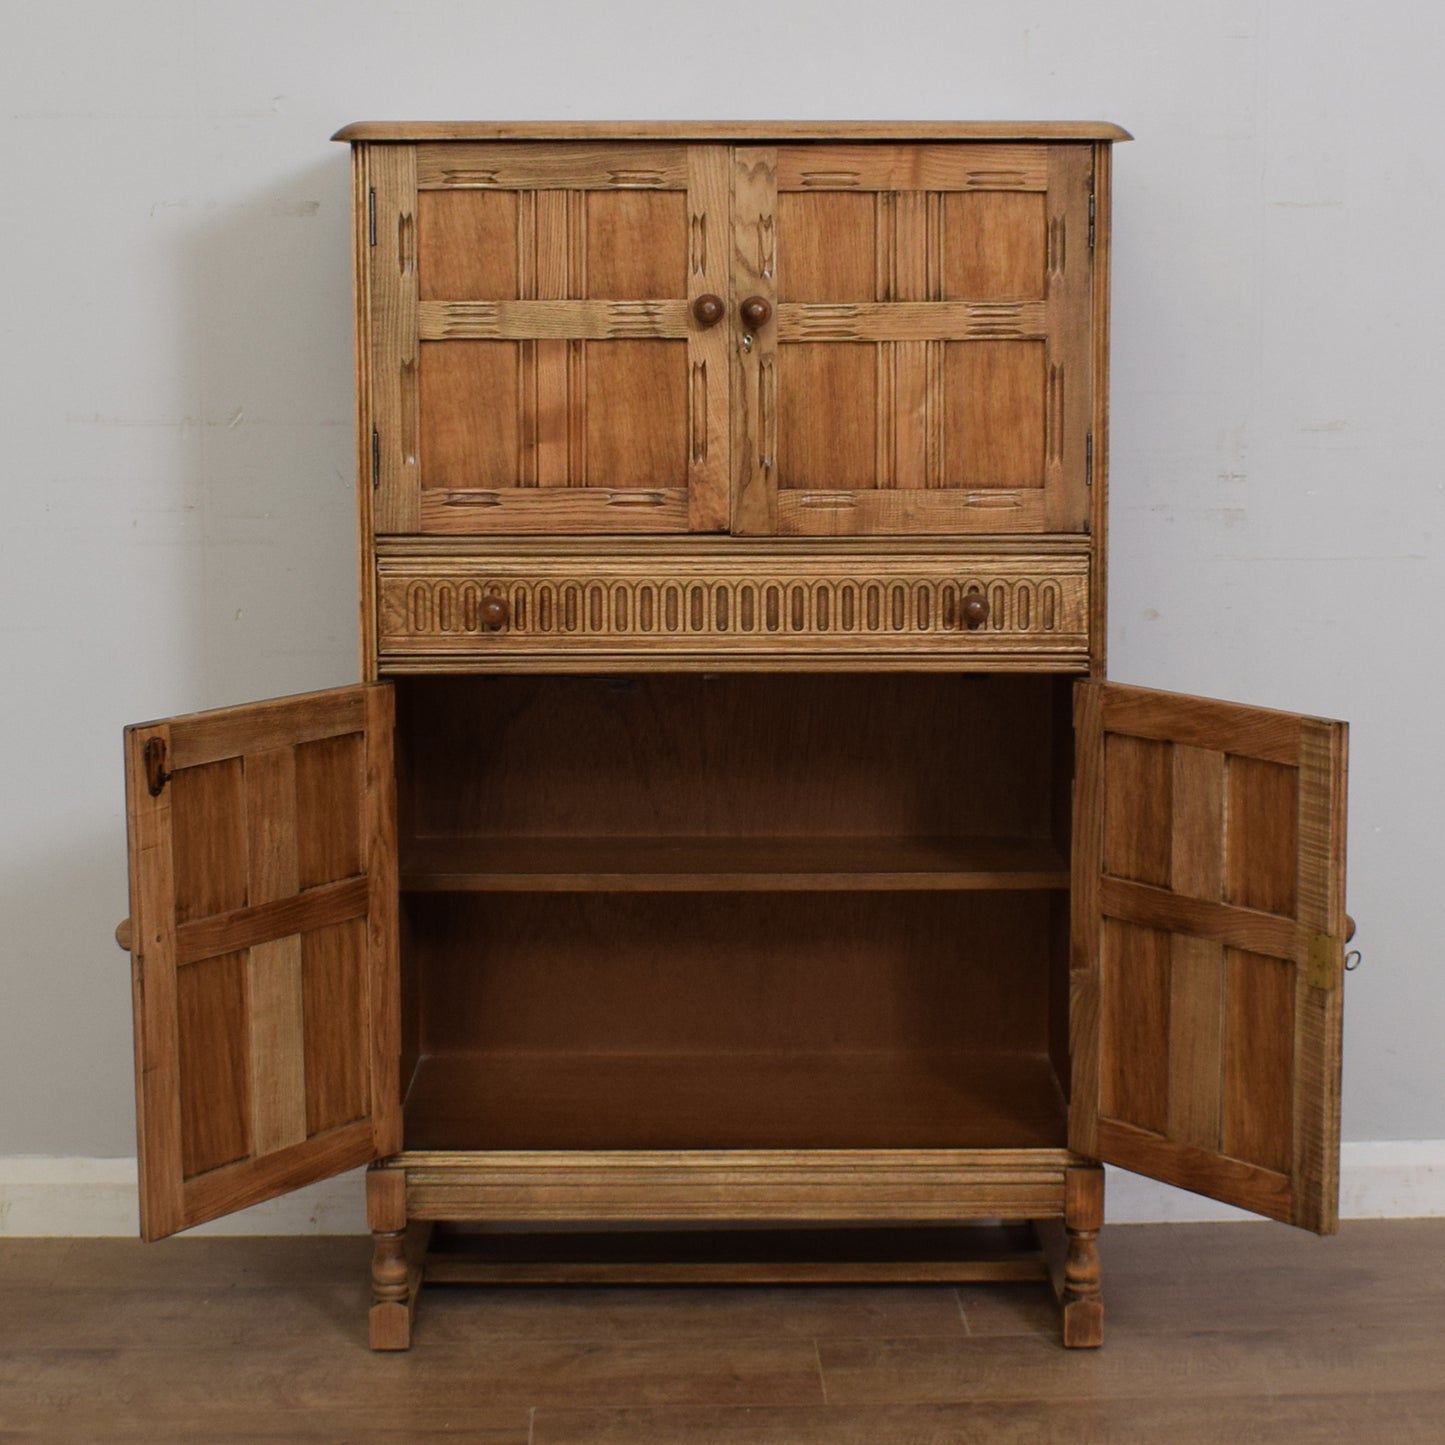 Priory Drinks Cabinet